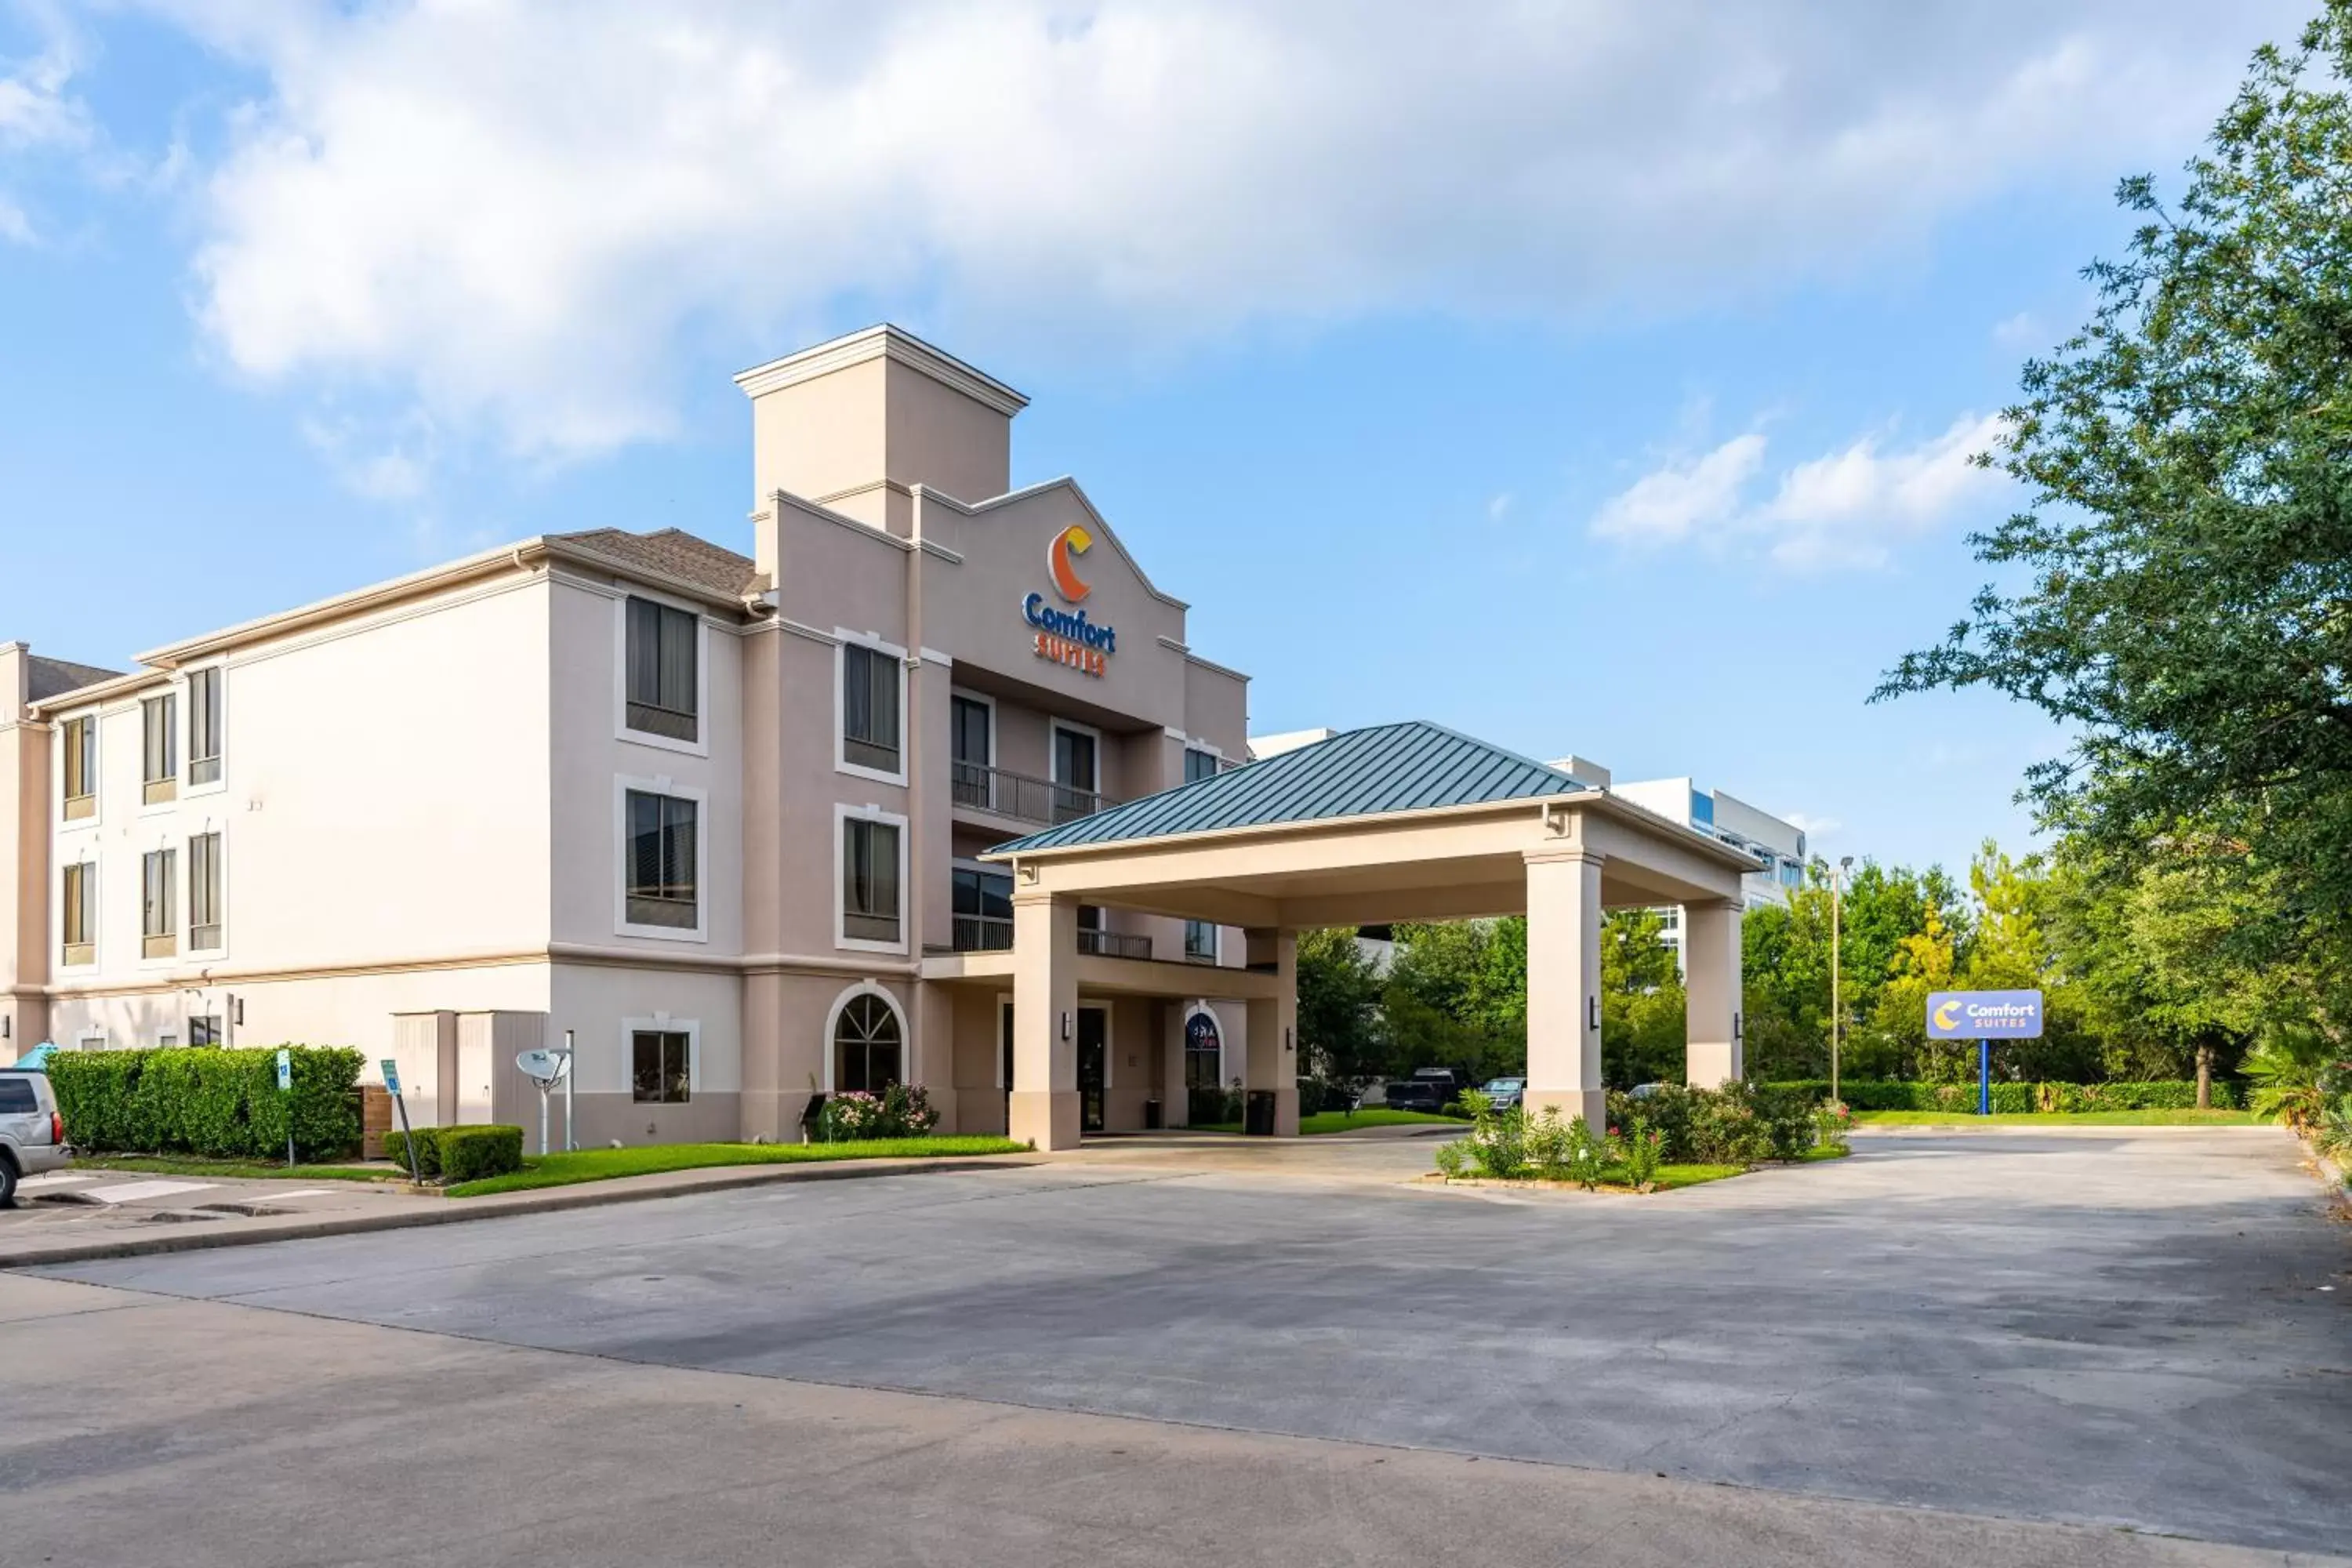 Property Building in Comfort Suites Houston West At Clay Road